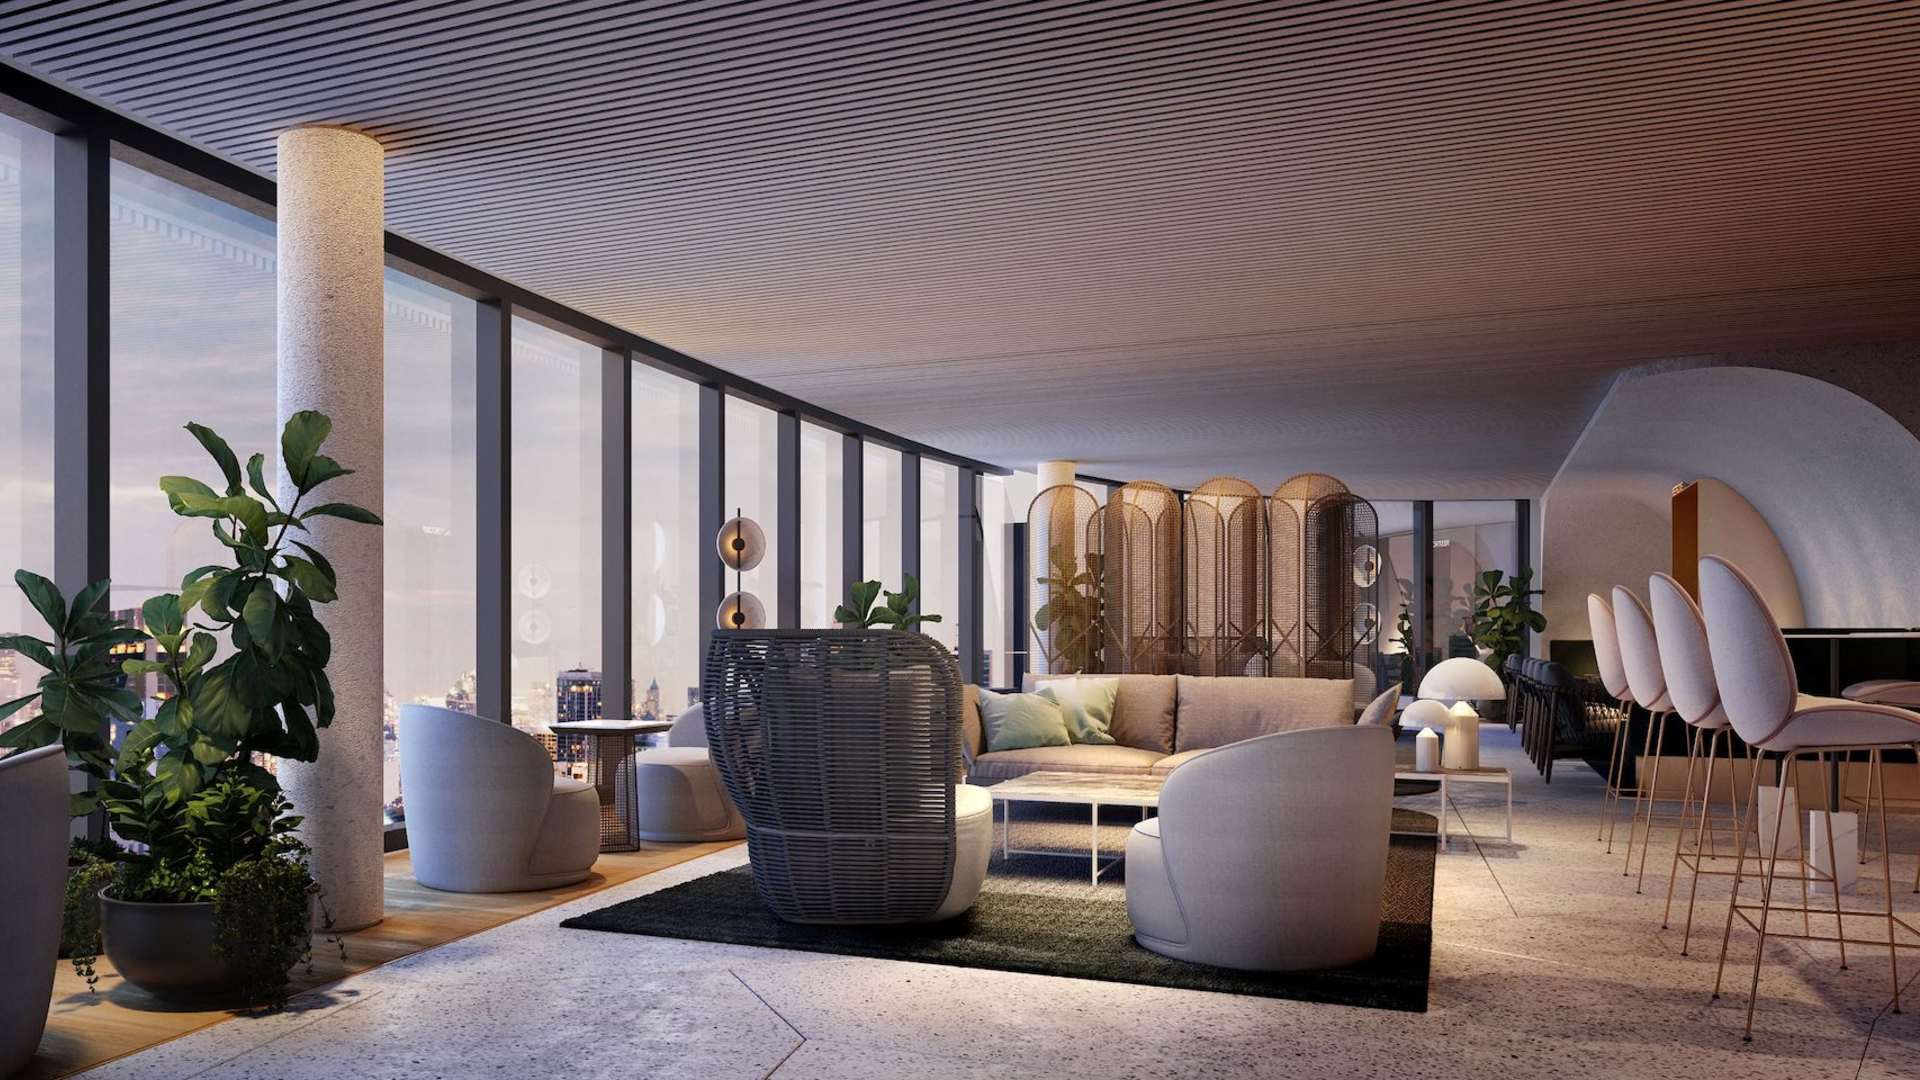 Melbourne's New Marriott Hotel Opens This Month with a Rooftop Bar and Heated Infinity Pool